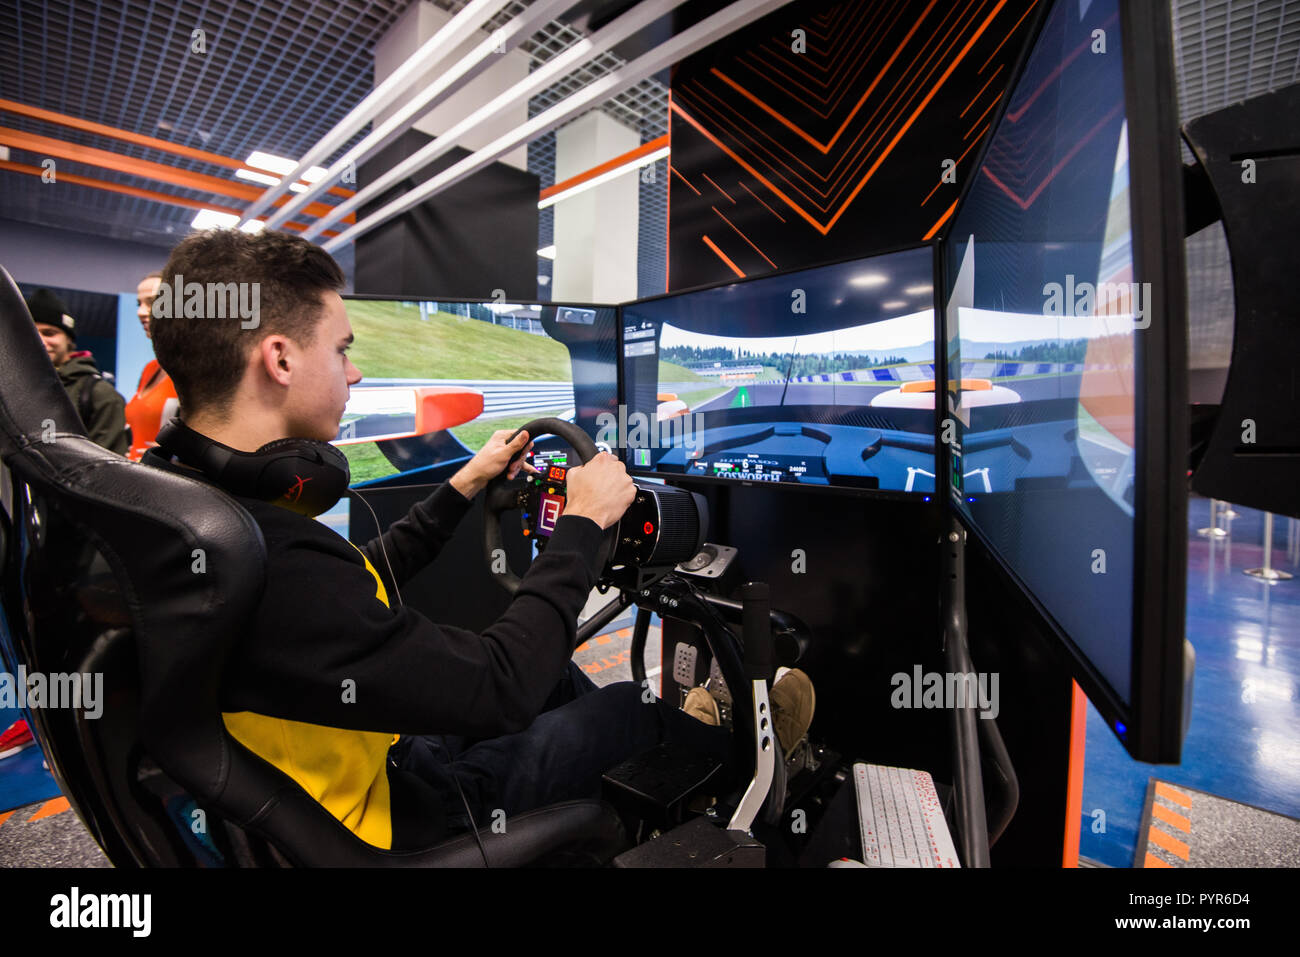 MOSCOW, RUSSIA - OCTOBER 27 2018. Simulation of race car video player game with big screen monitors and cockpit controls like a racing car. Stock Photo